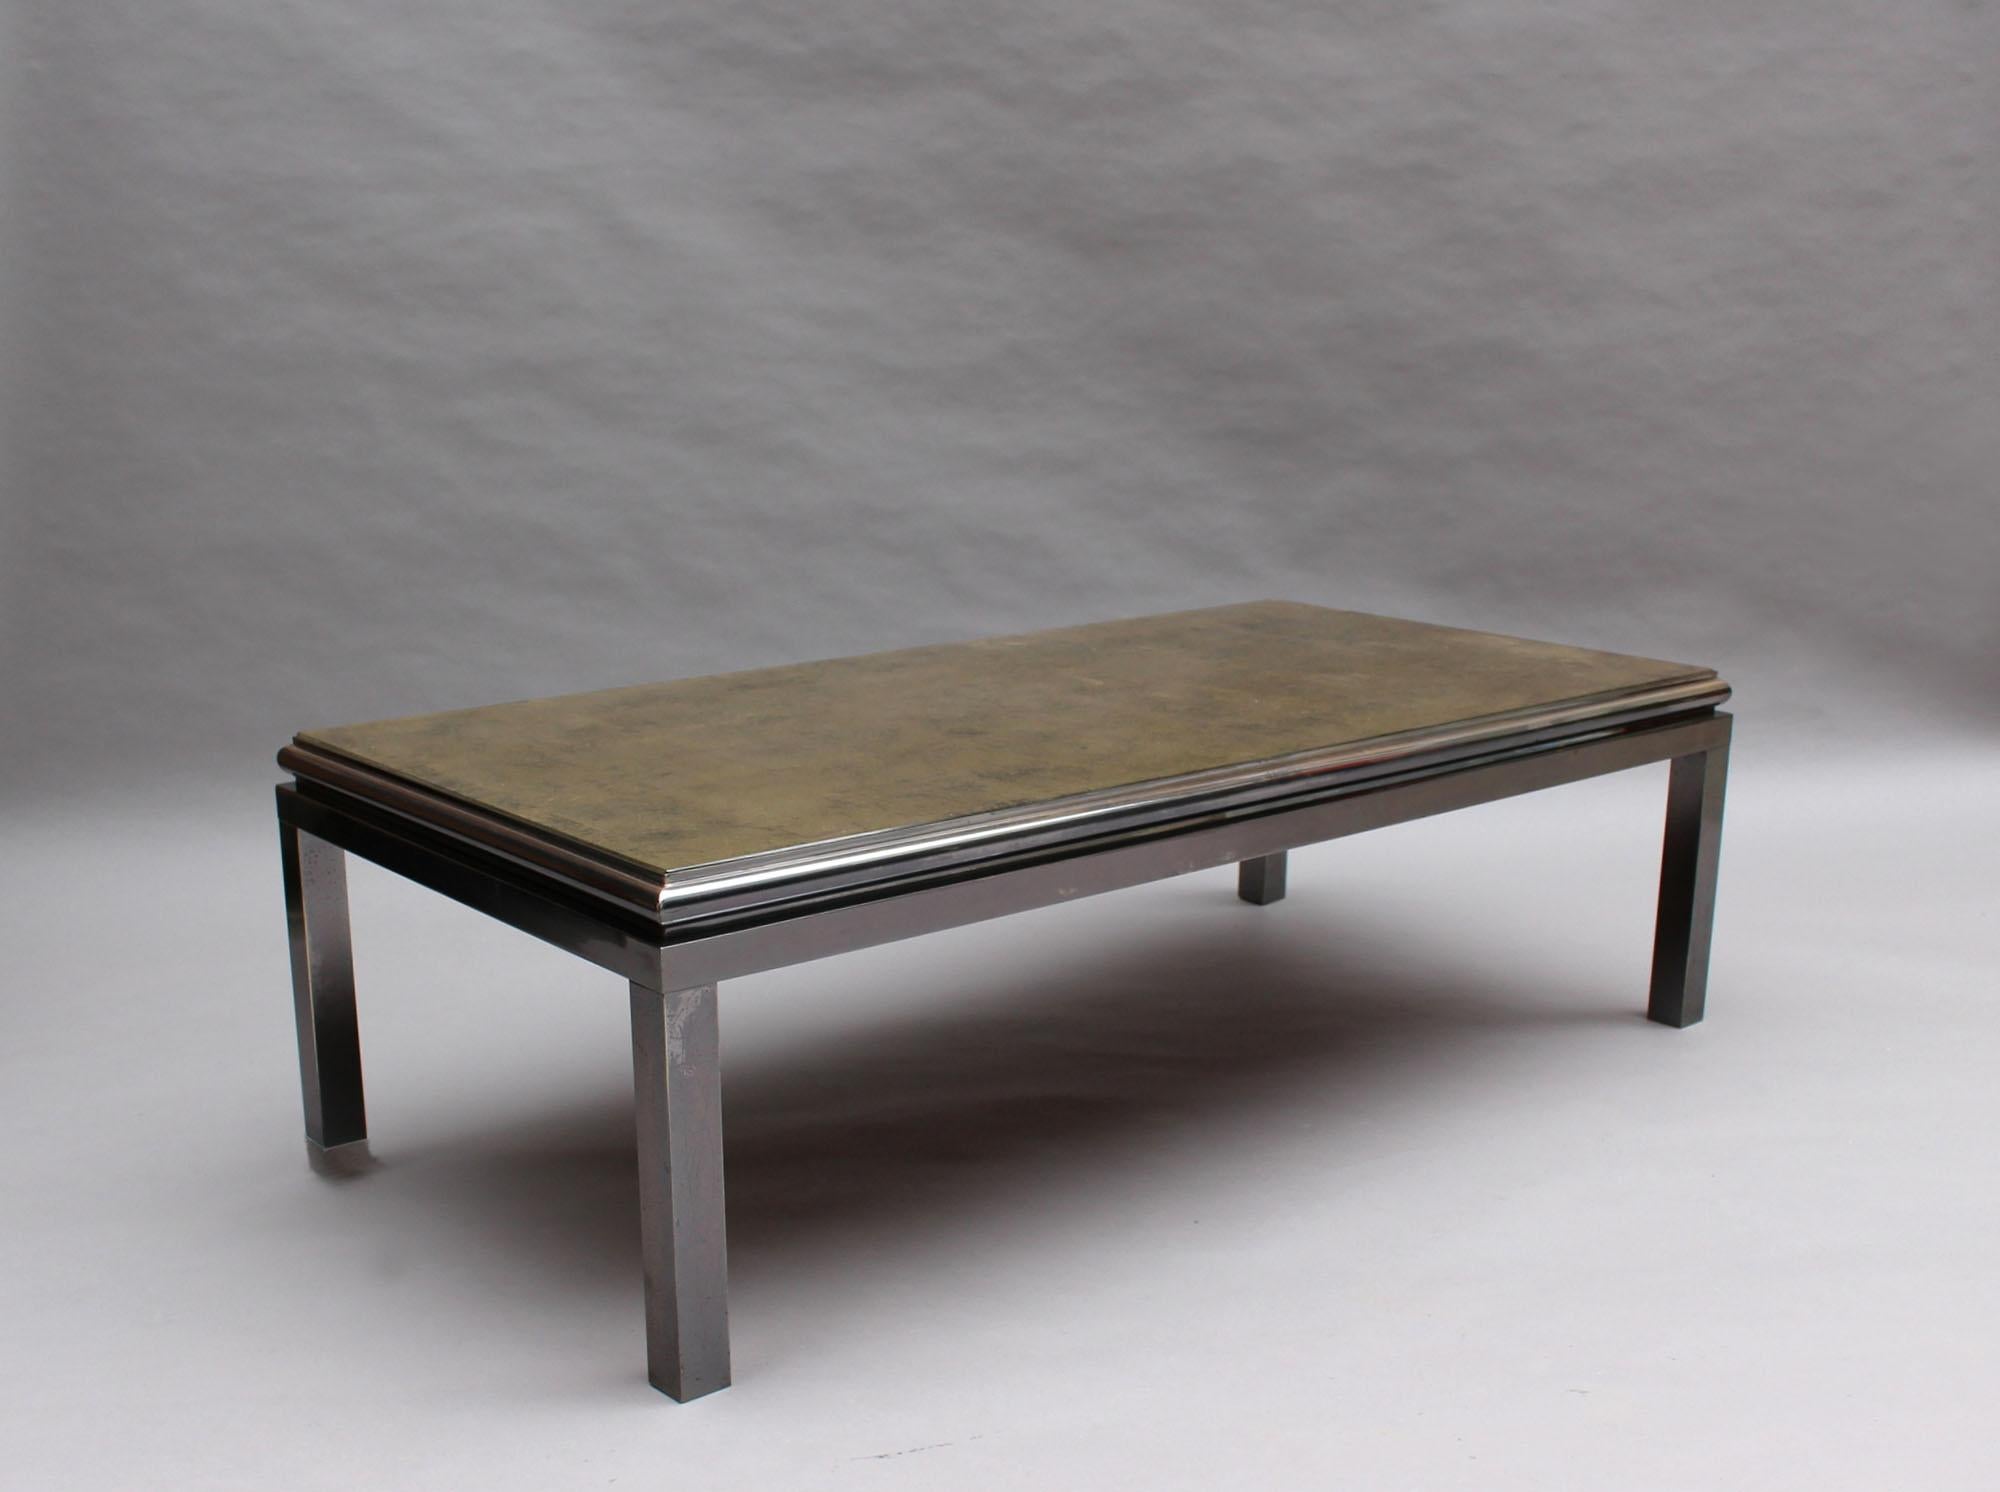 Fine French 1970s Eglomise Glass Top Coffee Table with a Patinated Metal Frame In Good Condition For Sale In Long Island City, NY